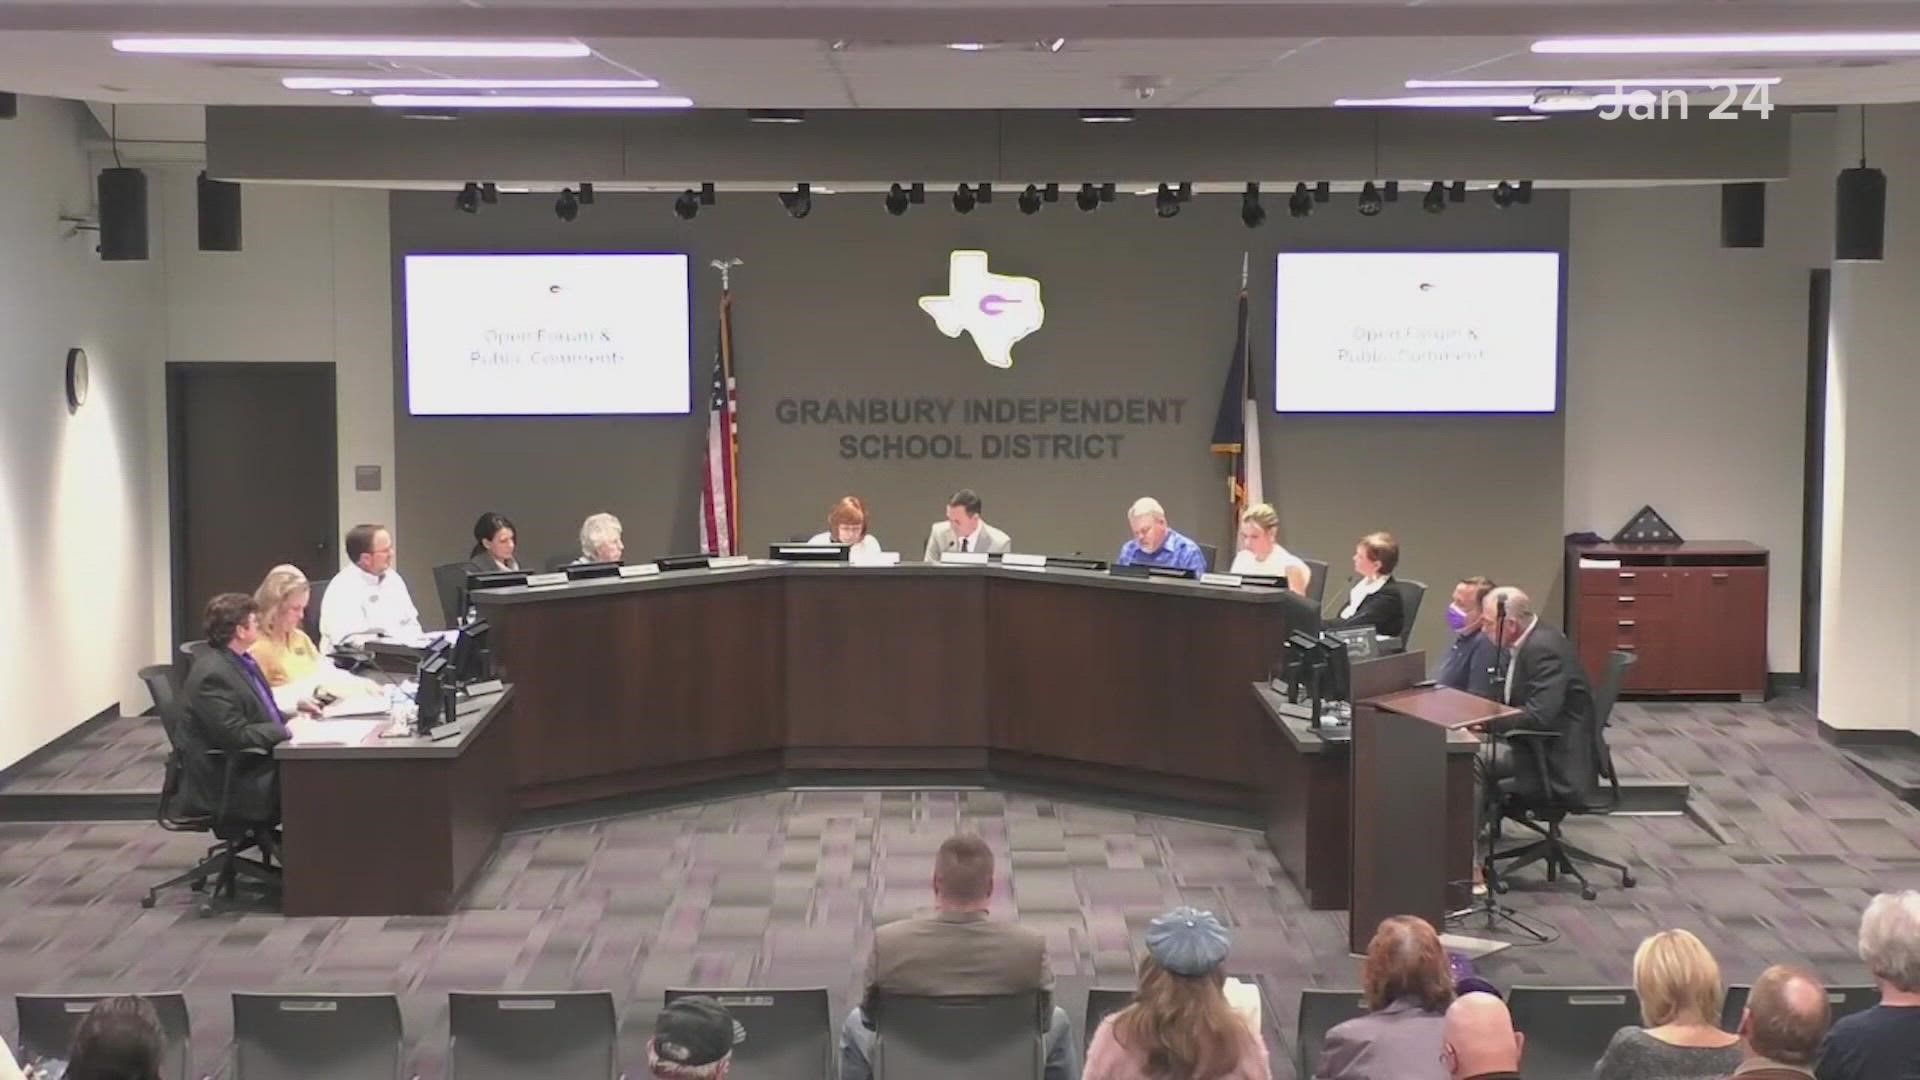 The U.S. Department of Education's civil rights division is investigating Granbury ISD.